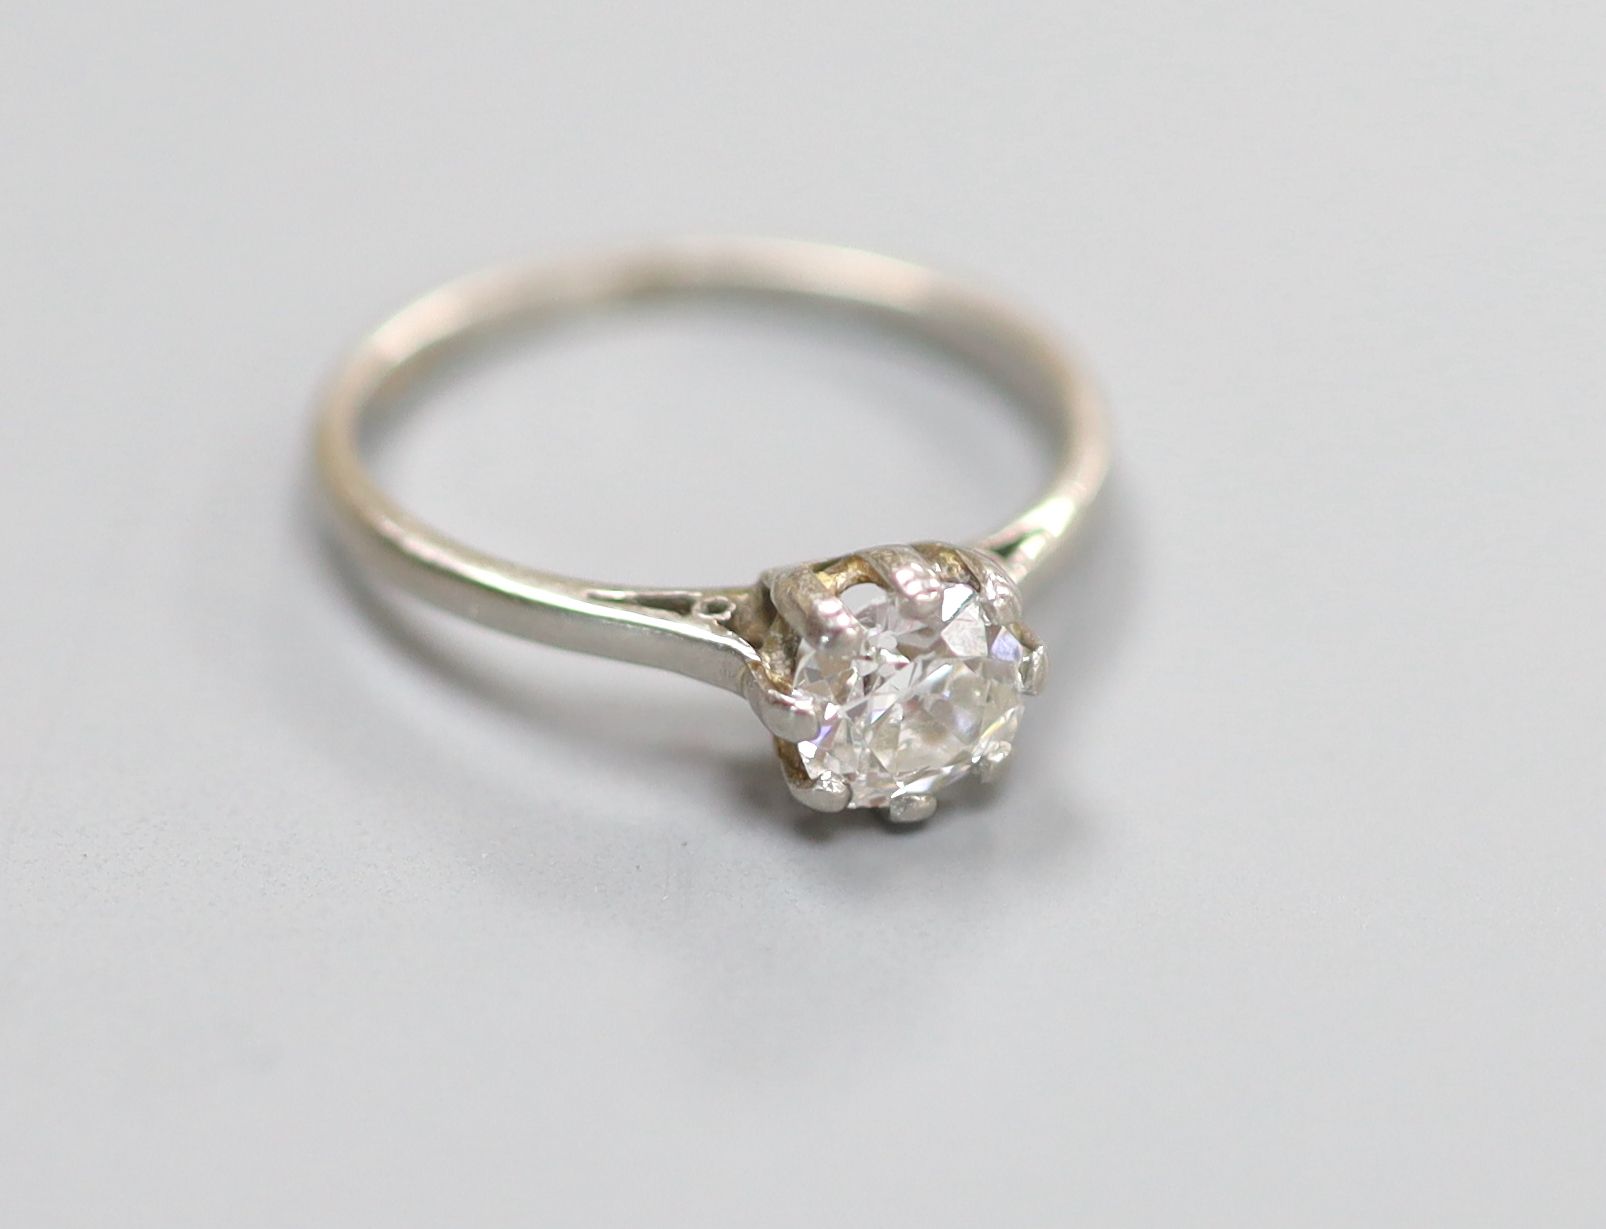 A white metal (stamped plat) and solitaire diamond ring